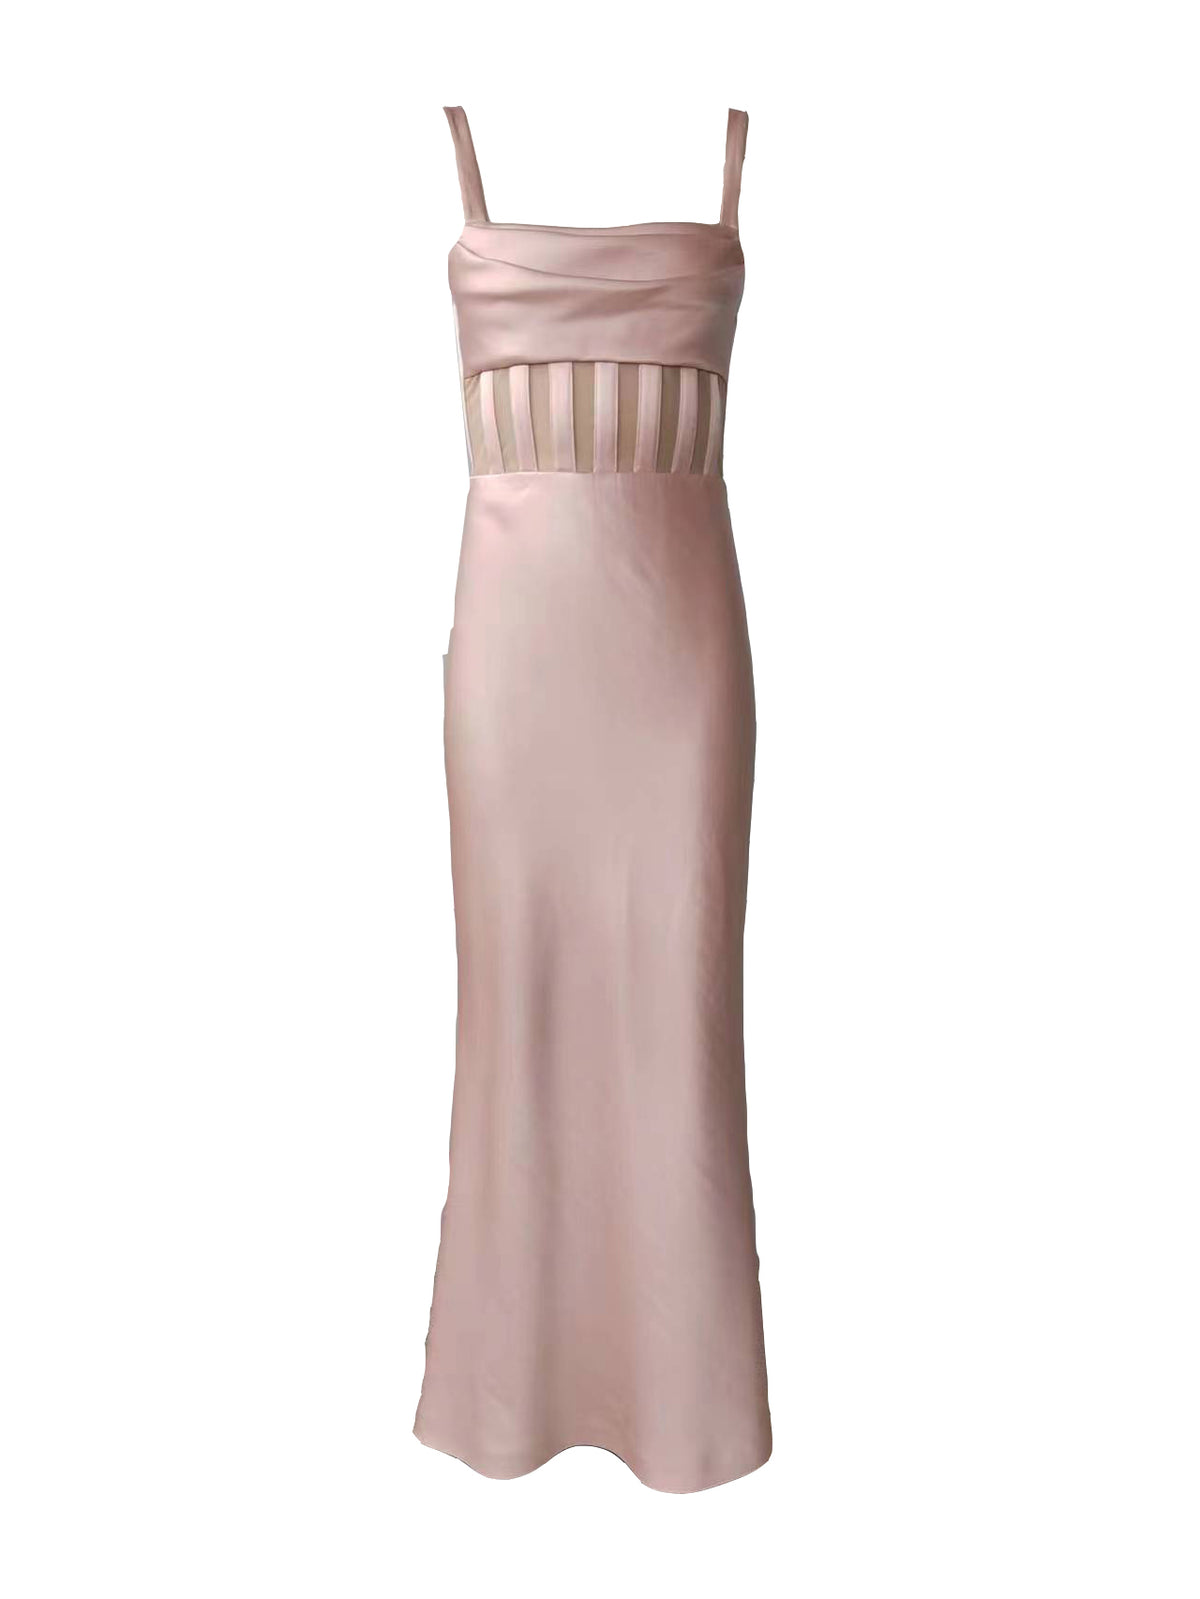 Valentina Maxi Dress in Pink Lace